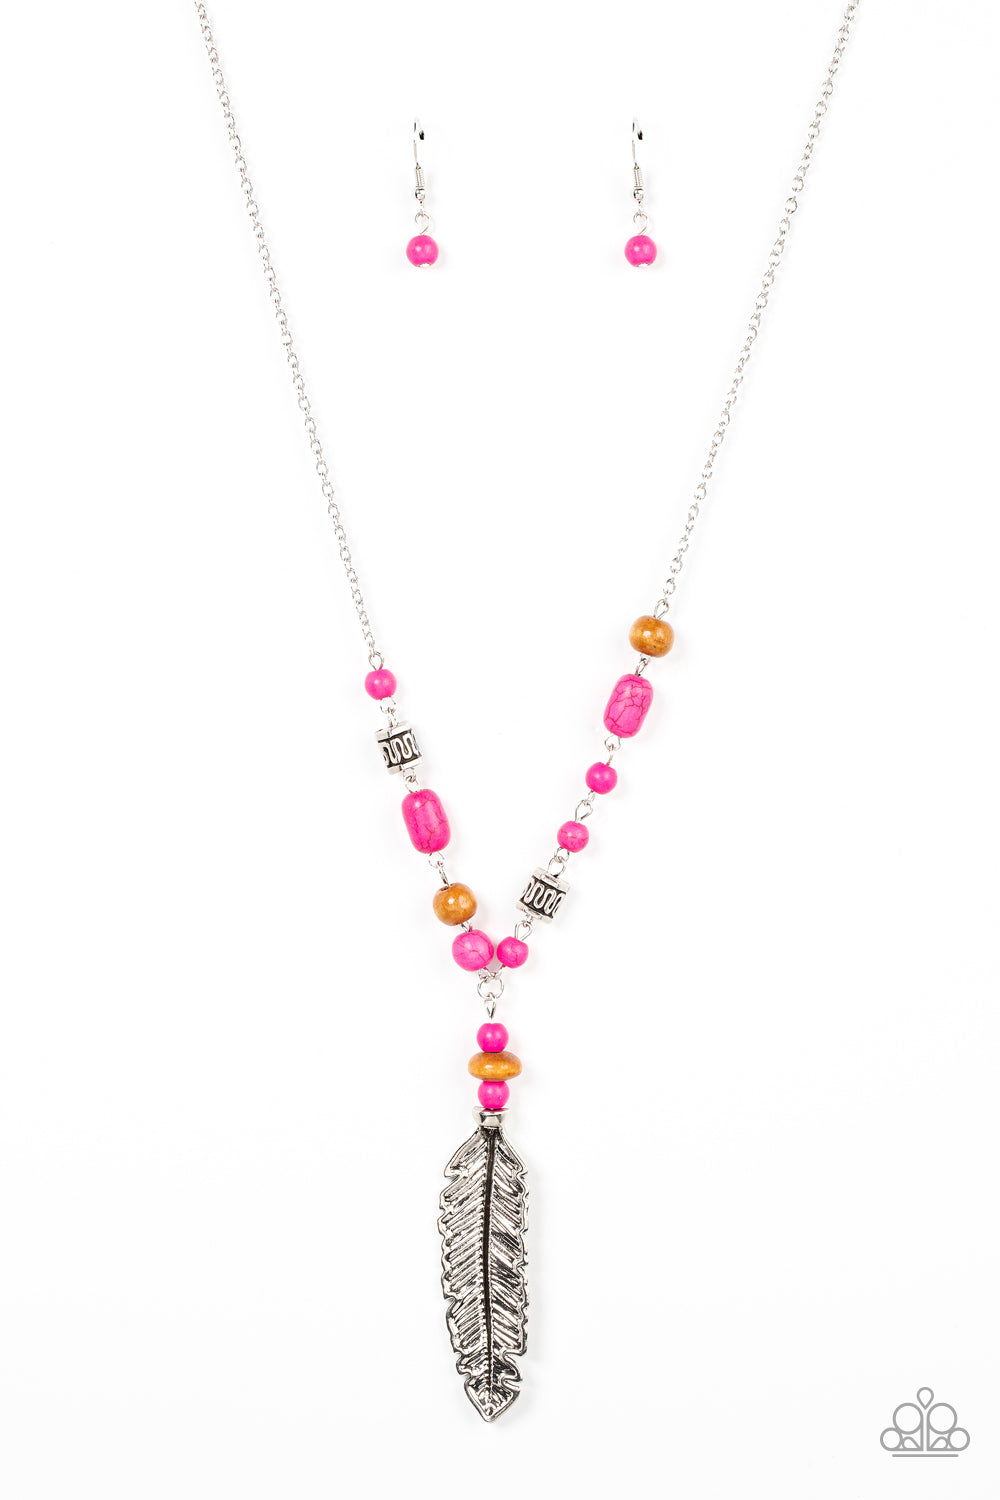 Watch Me Fly - pink - Paparazzi necklace